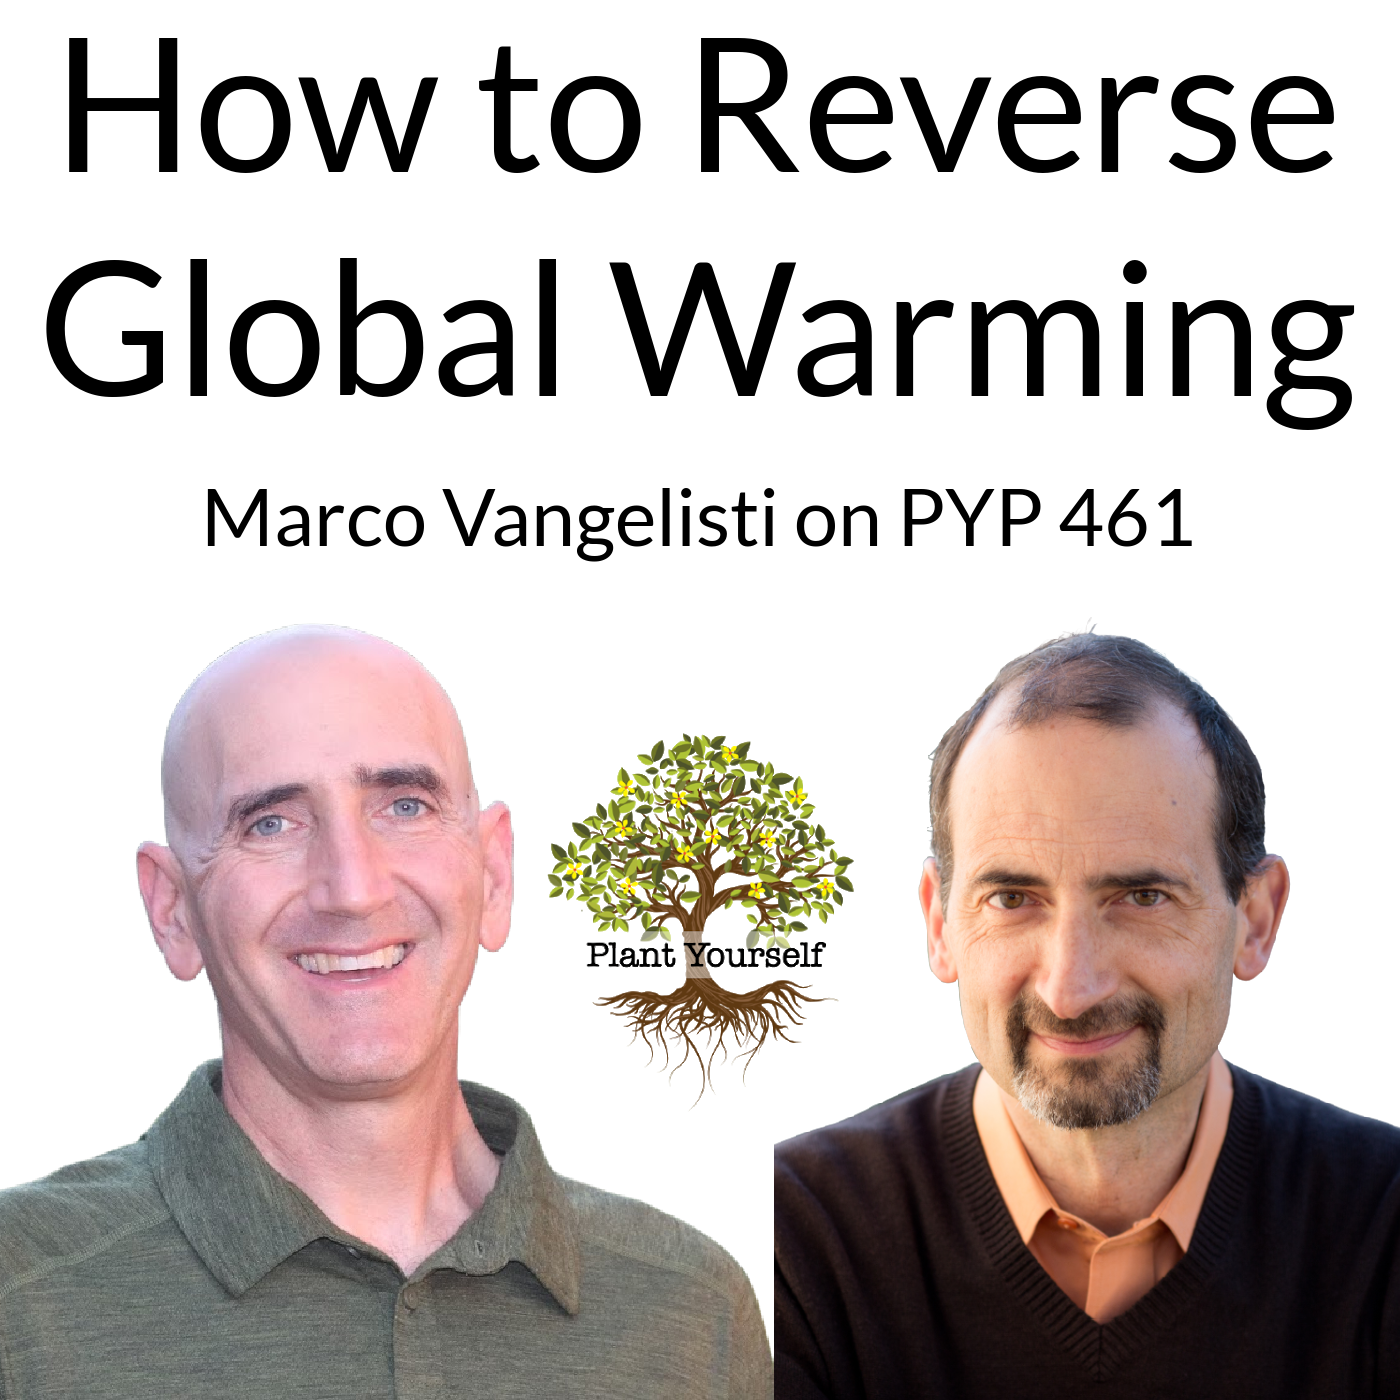 How to Reverse Global Warming: Marco Vangelisti on PYP 461